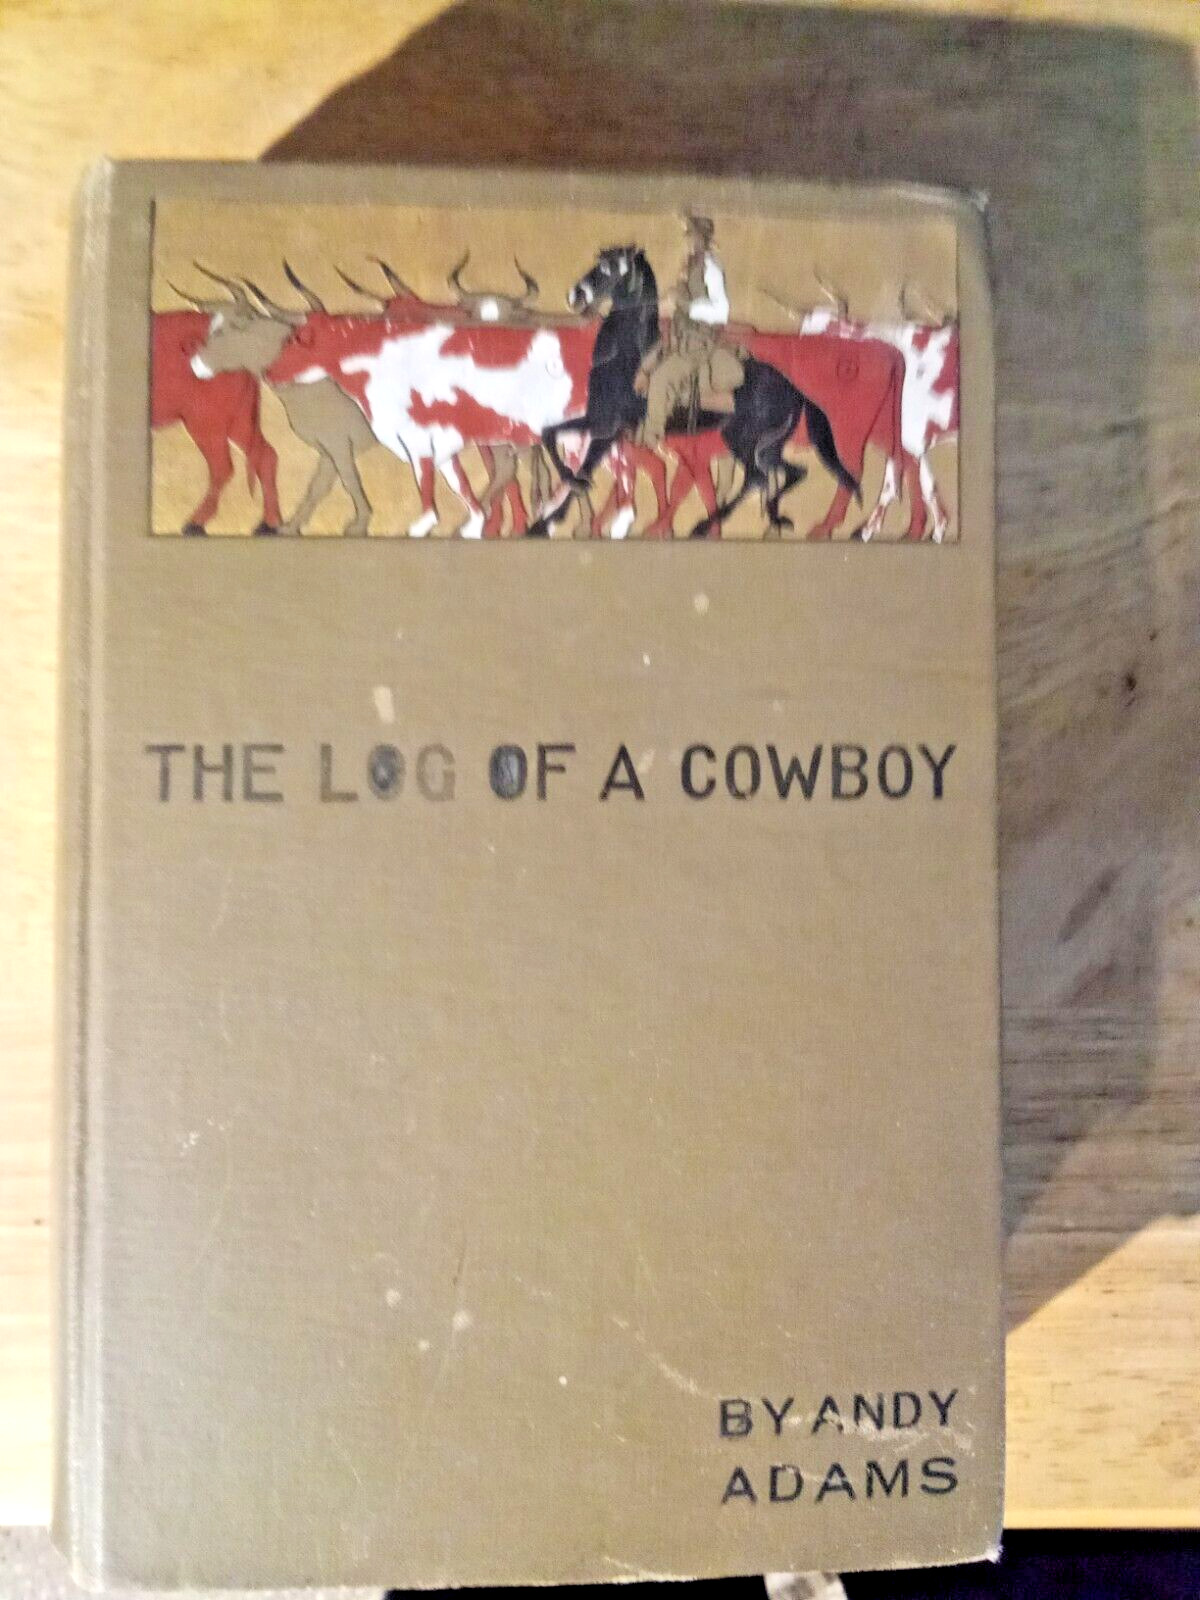 The Log of a Cowboy by Andy Adams Hardback 1st edition May 1903